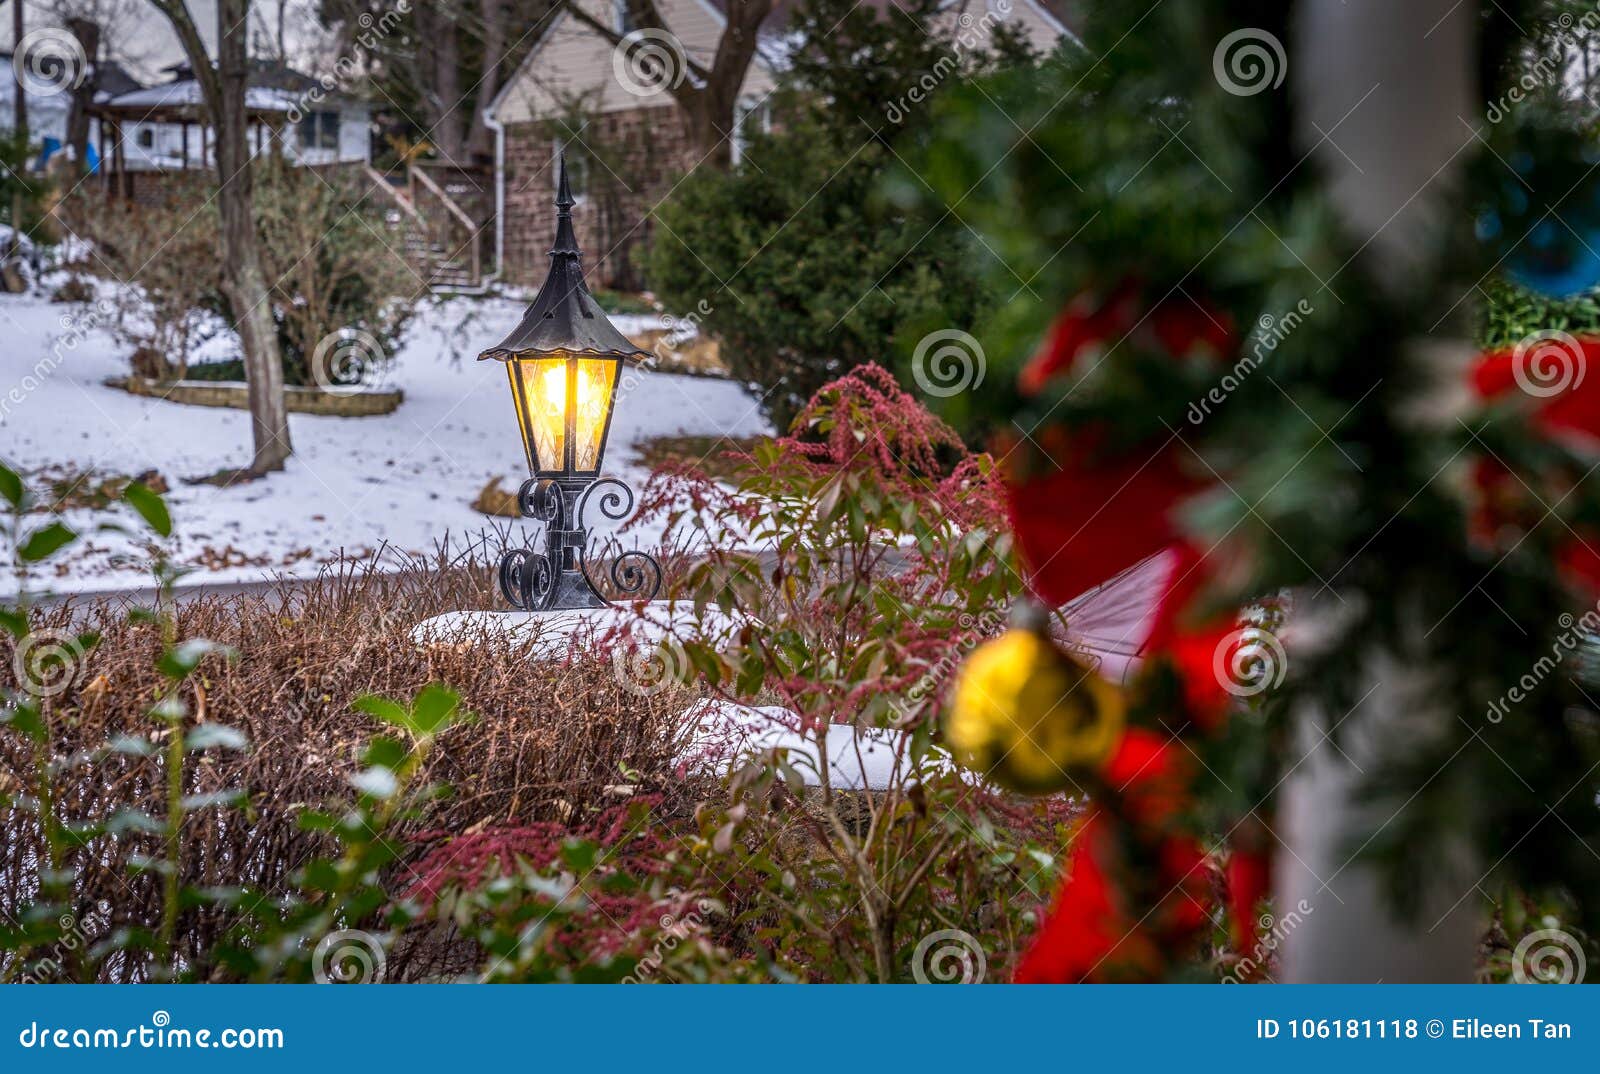 Outdoor Lantern with Snow at Holiday Season Stock Photo - Image of ...